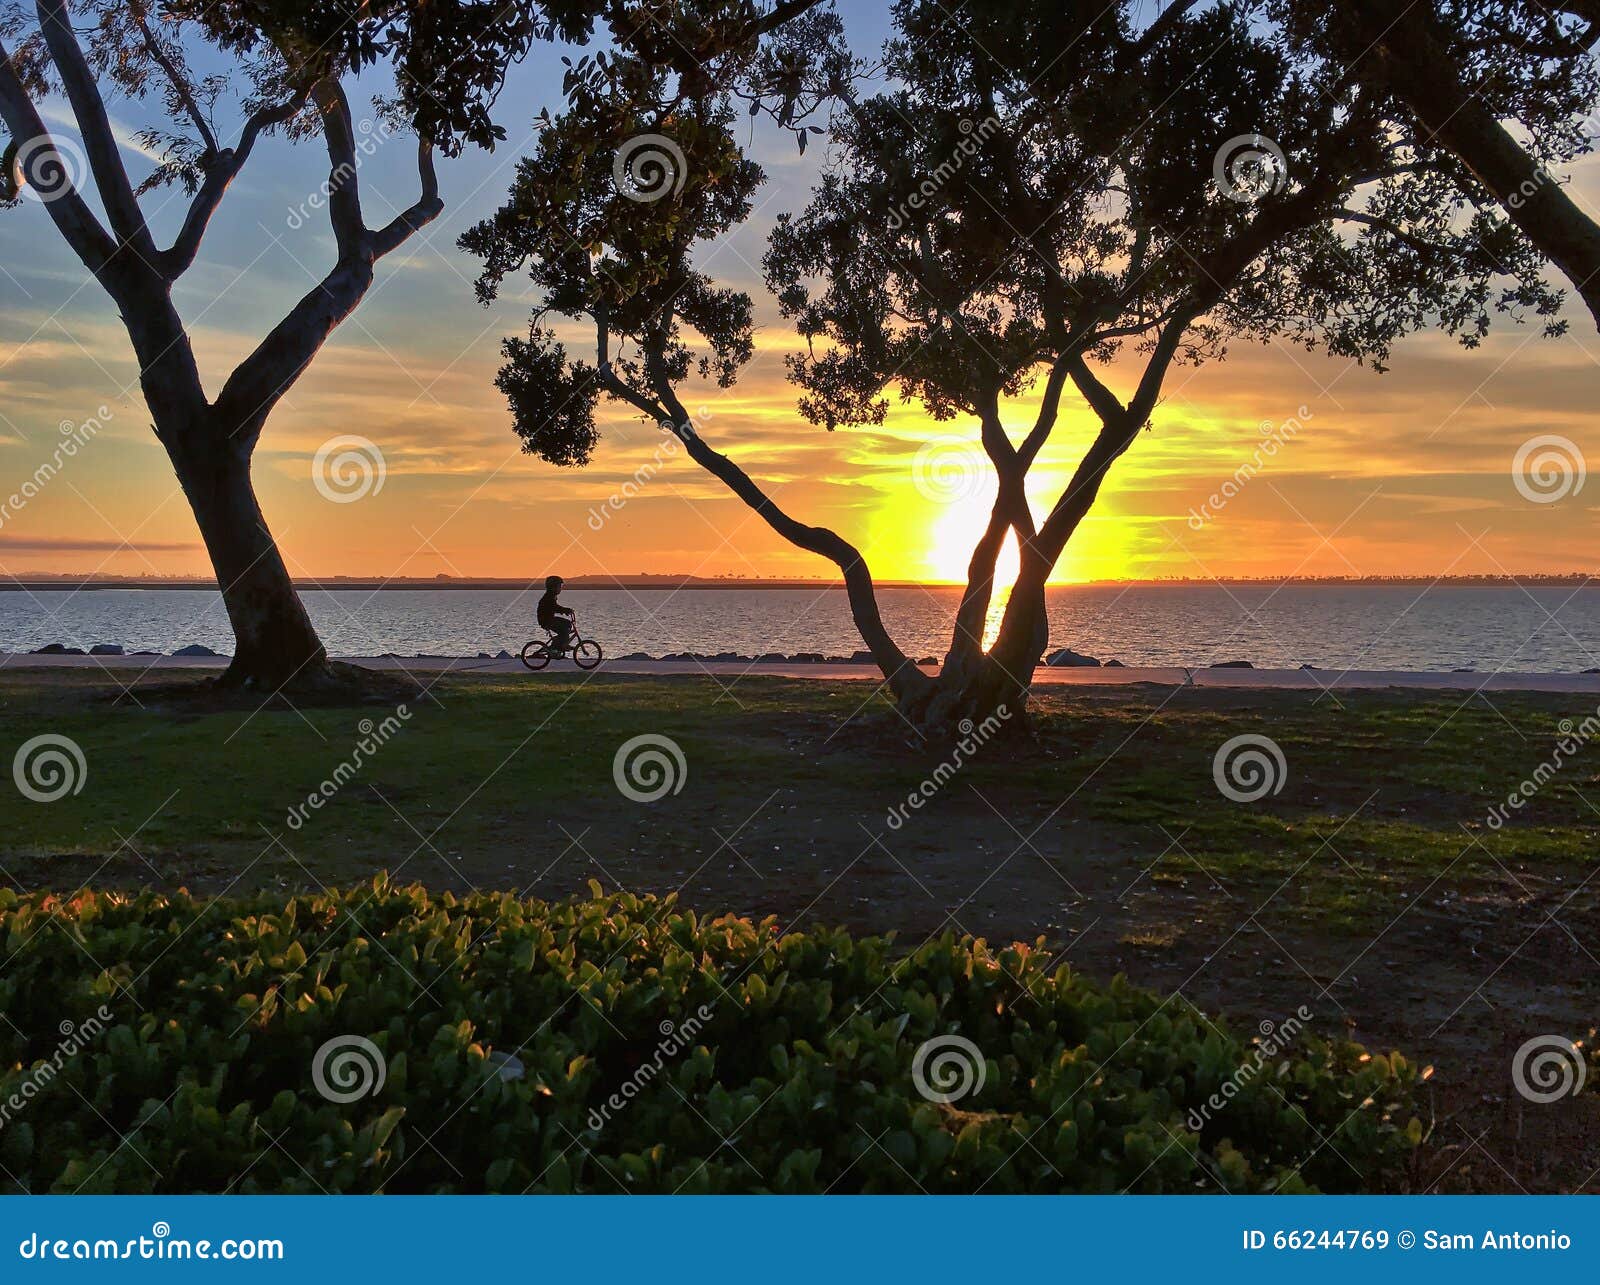 silhouette of a child riding a bicycle at sunset at bayside park